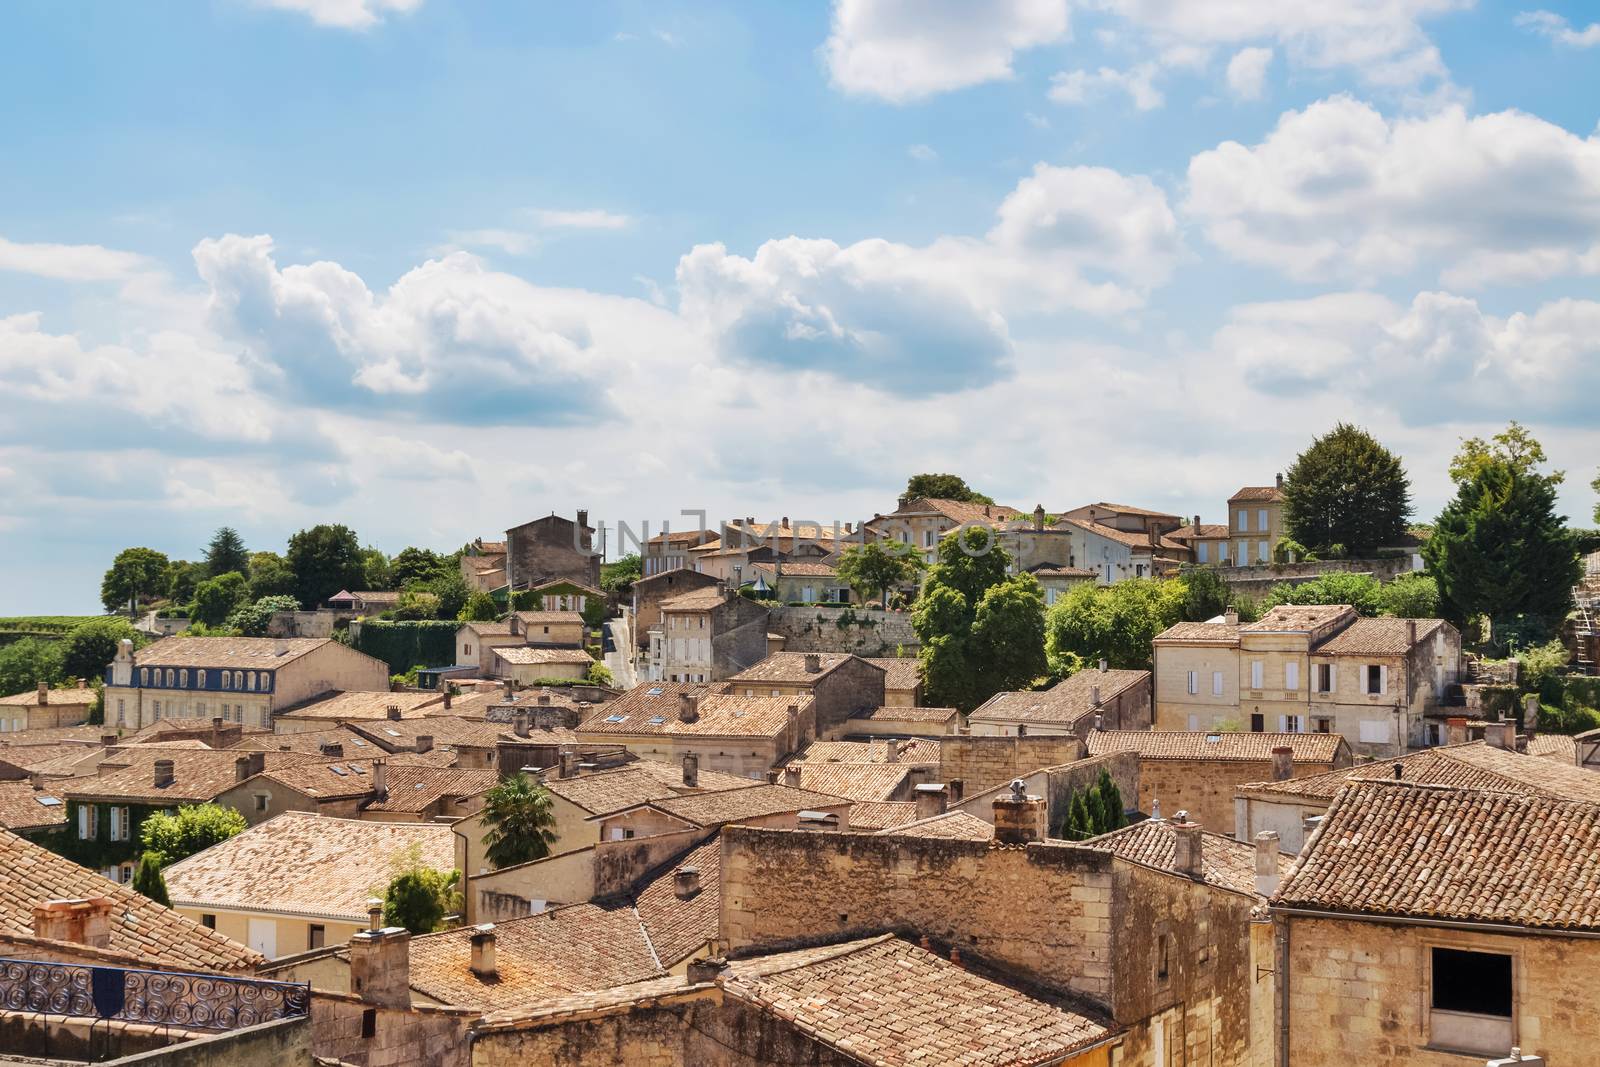 View over picturesque rooftops of Saint-Emilion, one of the principal red wine areas of Bordeaux, in France.